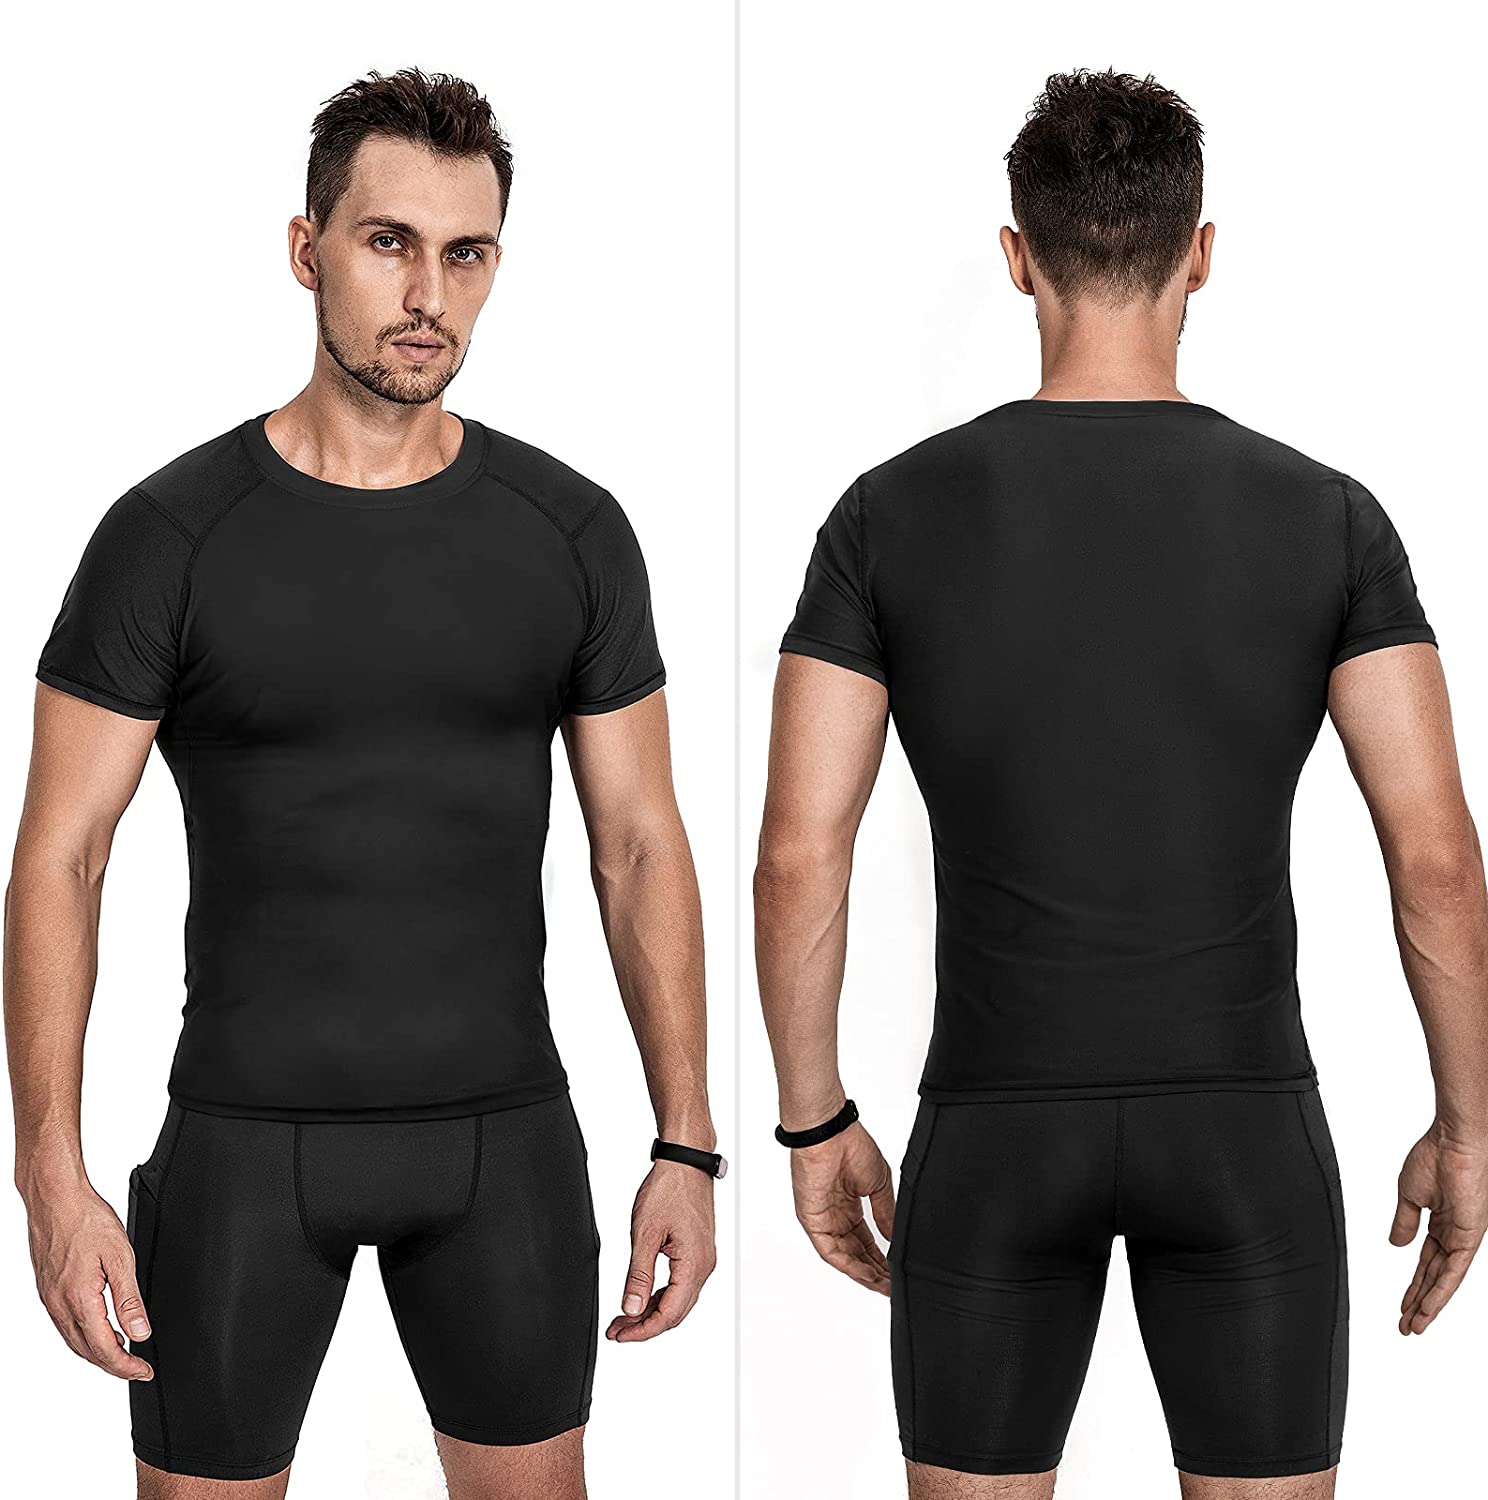 Men's Compression Tops Cool Dry Workout T-shirts 02